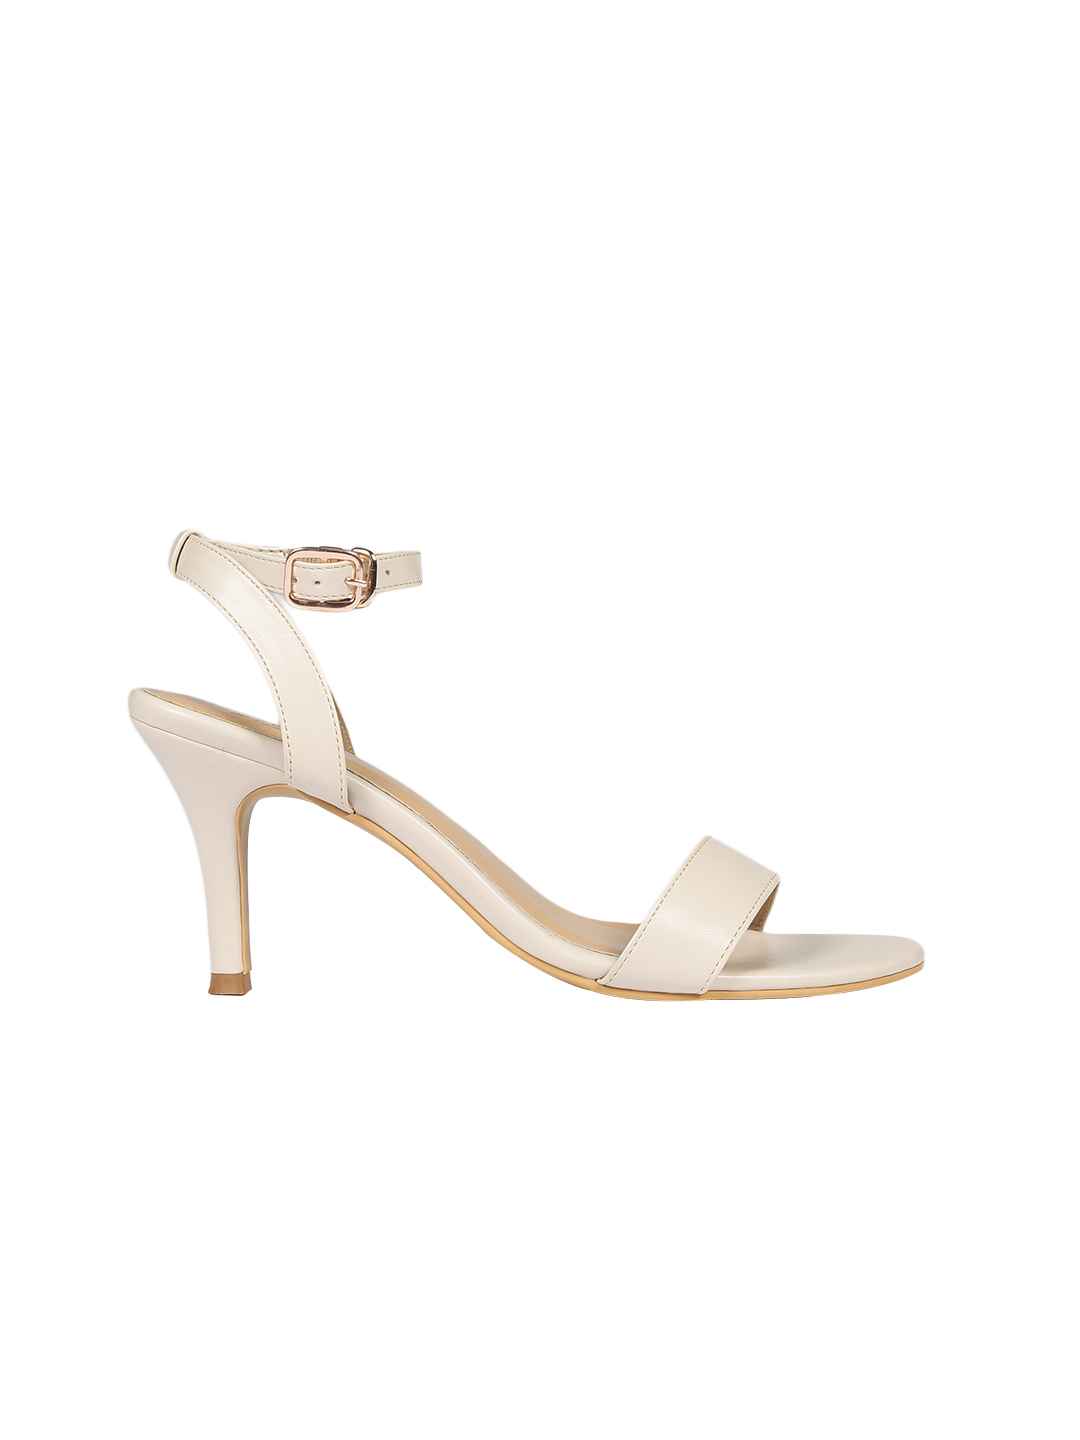 OFF-WHITE: Lollipop Strappy sandals in laminated leather - Black | Off-White  heeled sandals OWIH052F23LEA001 online at GIGLIO.COM